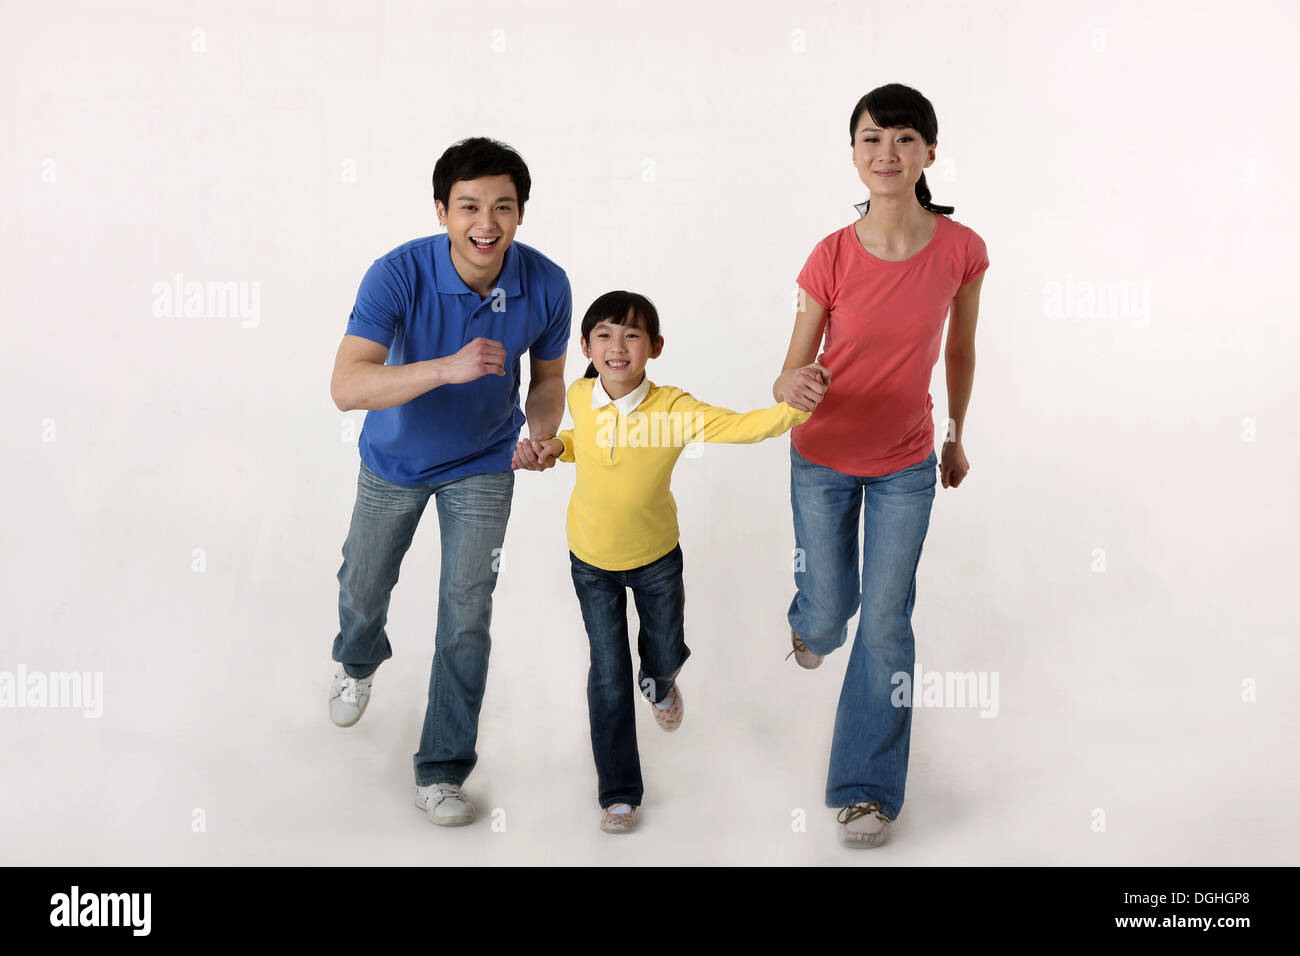 East Asian family with one child running hand in hand, smiling, looking at camera Stock Photo